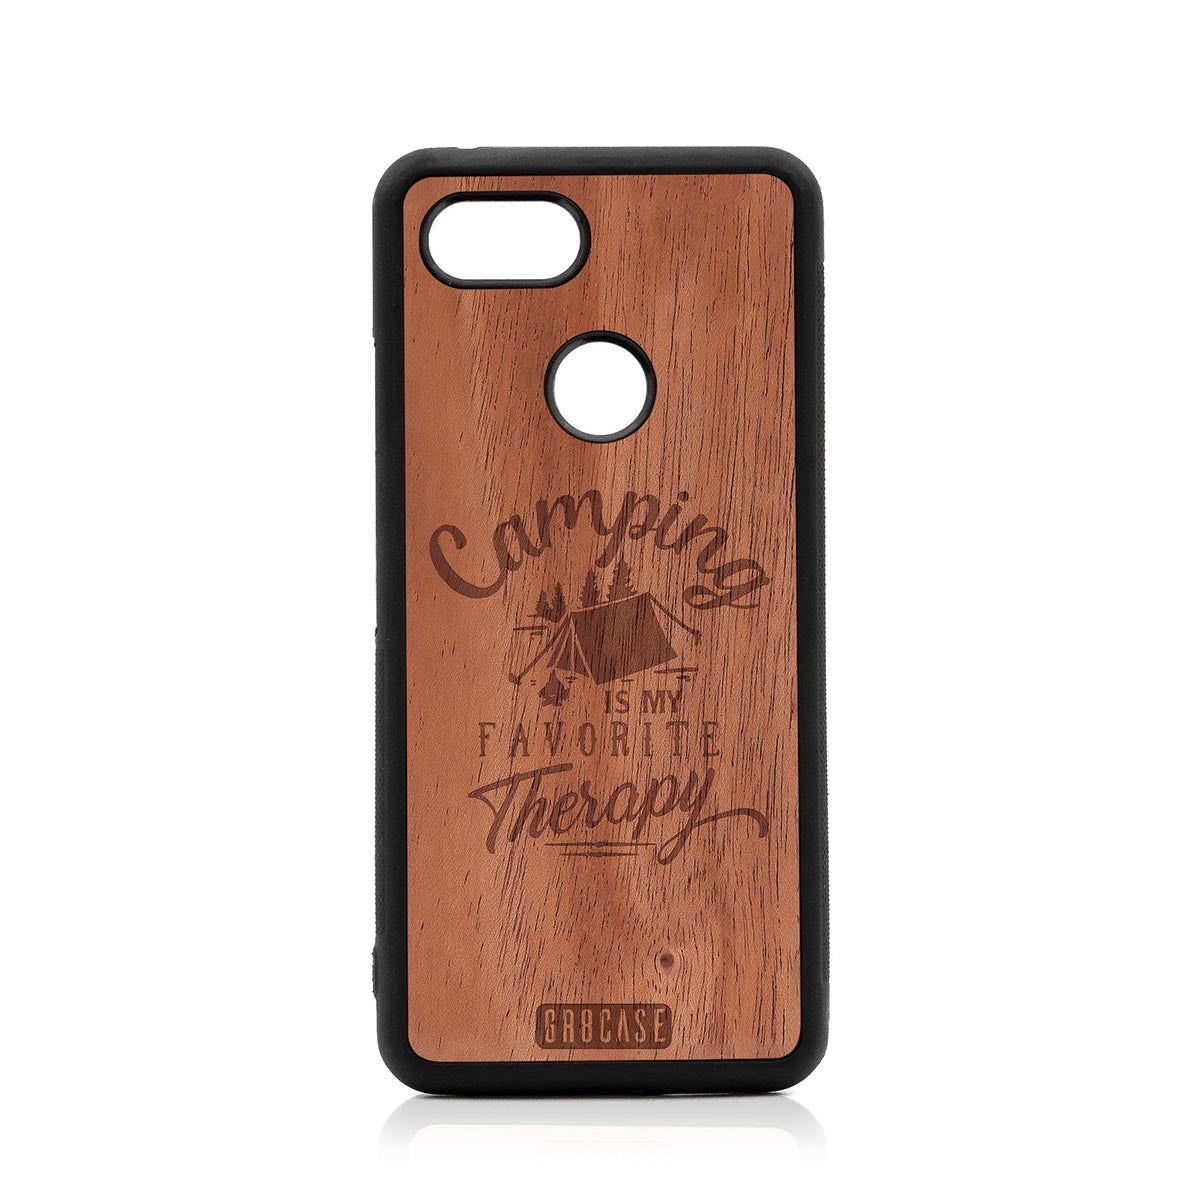 Camping Is My Favorite Therapy Design Wood Case For Google Pixel 3 by GR8CASE